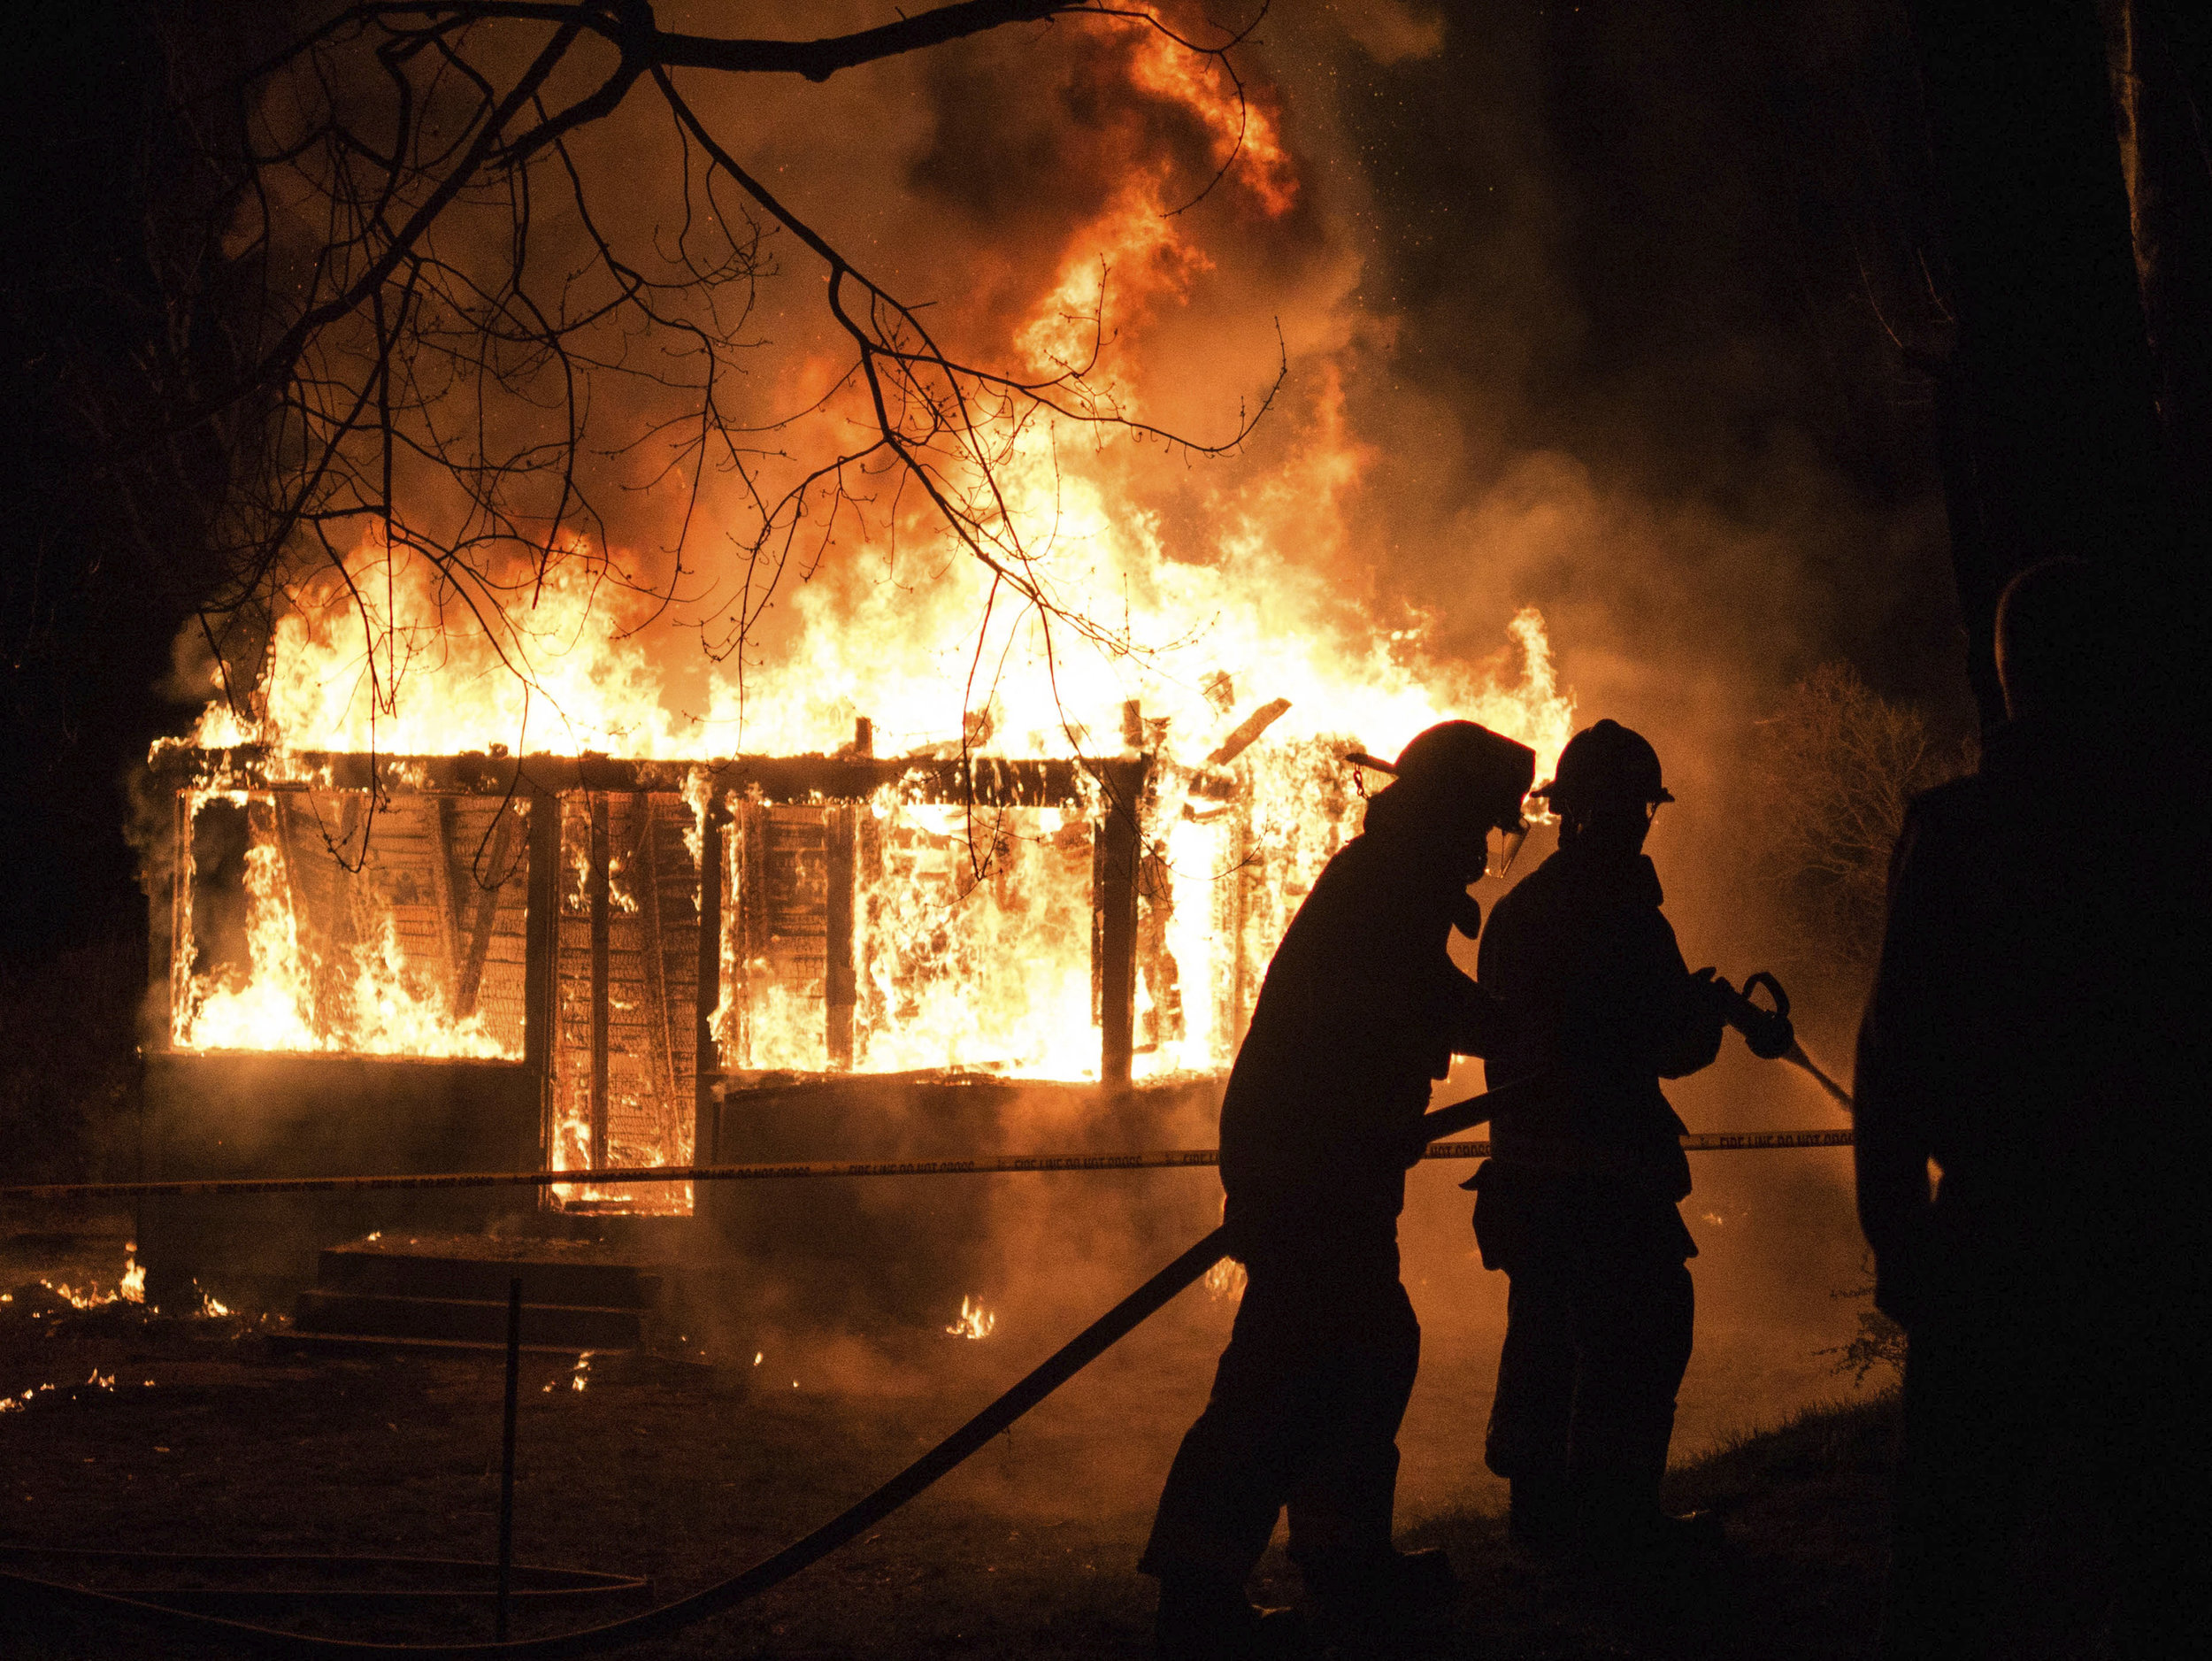 Camden firefighters keep the controlled burn of the abandoned house in check. Photo by Peter Kalajian